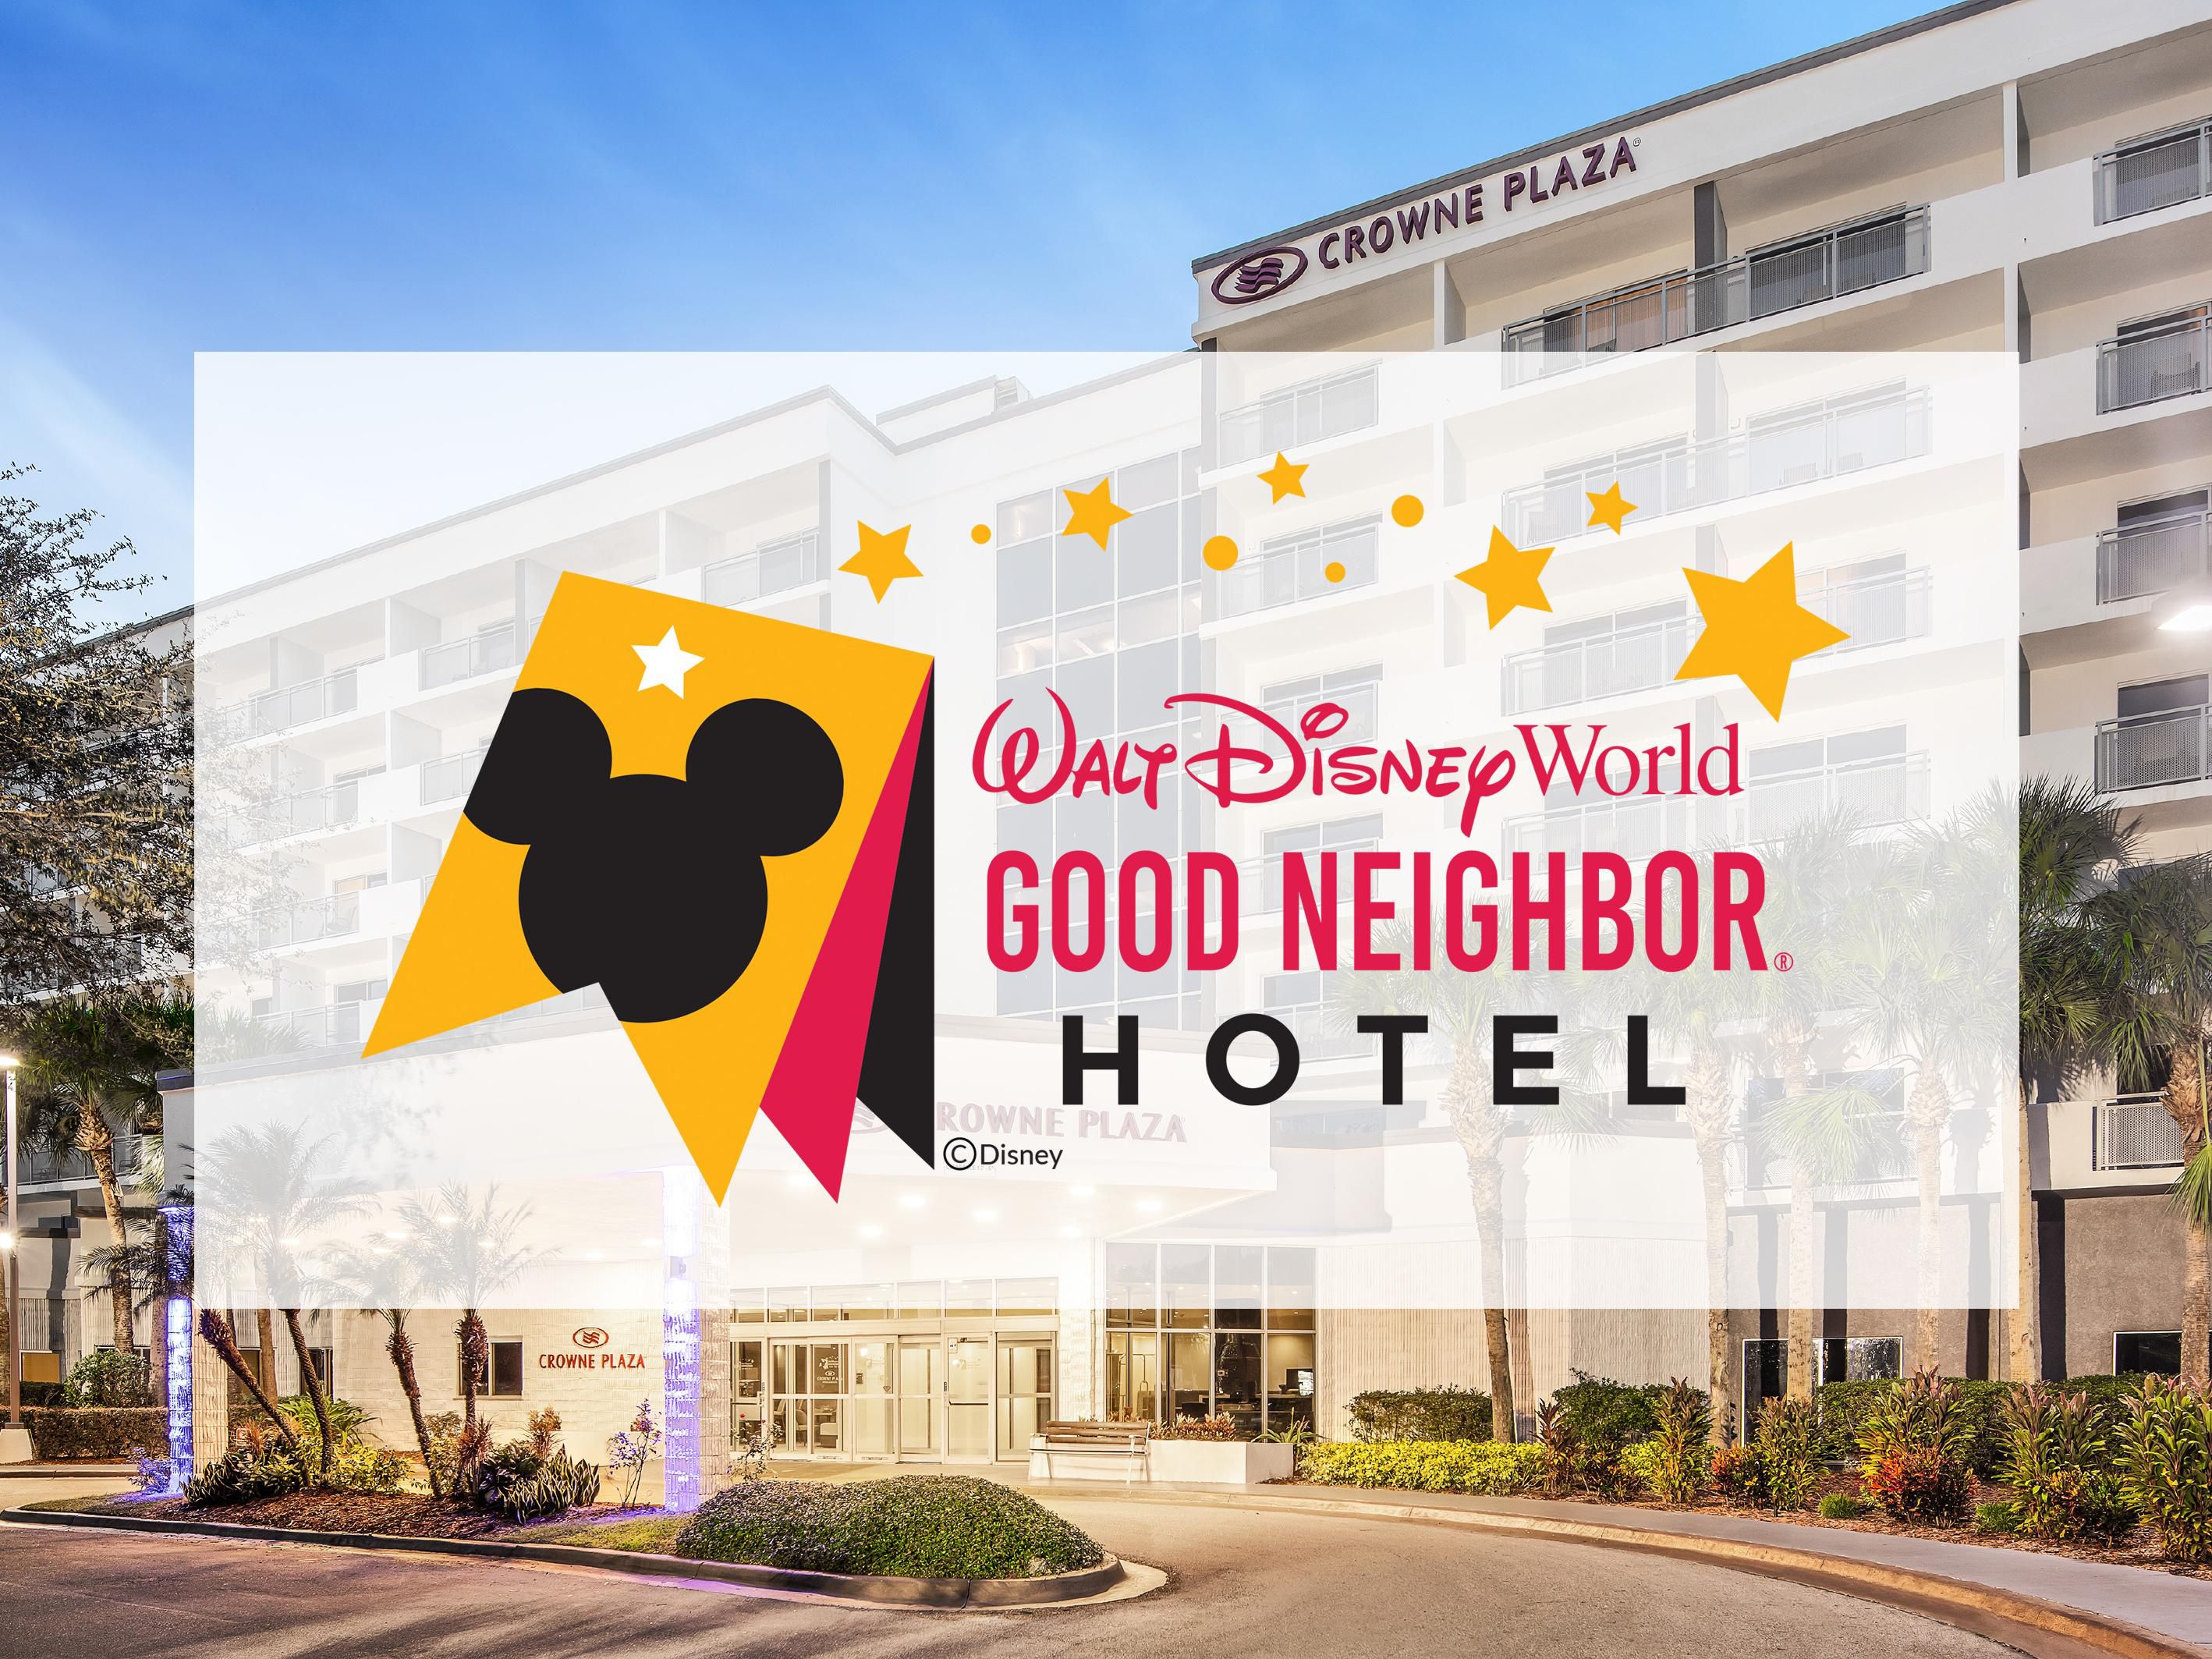 Less than one mile from Walt Disney World®, our family-friendly hotel is the perfect place to relax & reset between adventures at the theme parks. Ride our shuttle, included in your resort fee, to the Disney parks, including the Magic Kingdom, EPCOT, & Animal Kingdom. As a Disney Good Neighbor Hotel, we offer comfort & authentic family experiences.